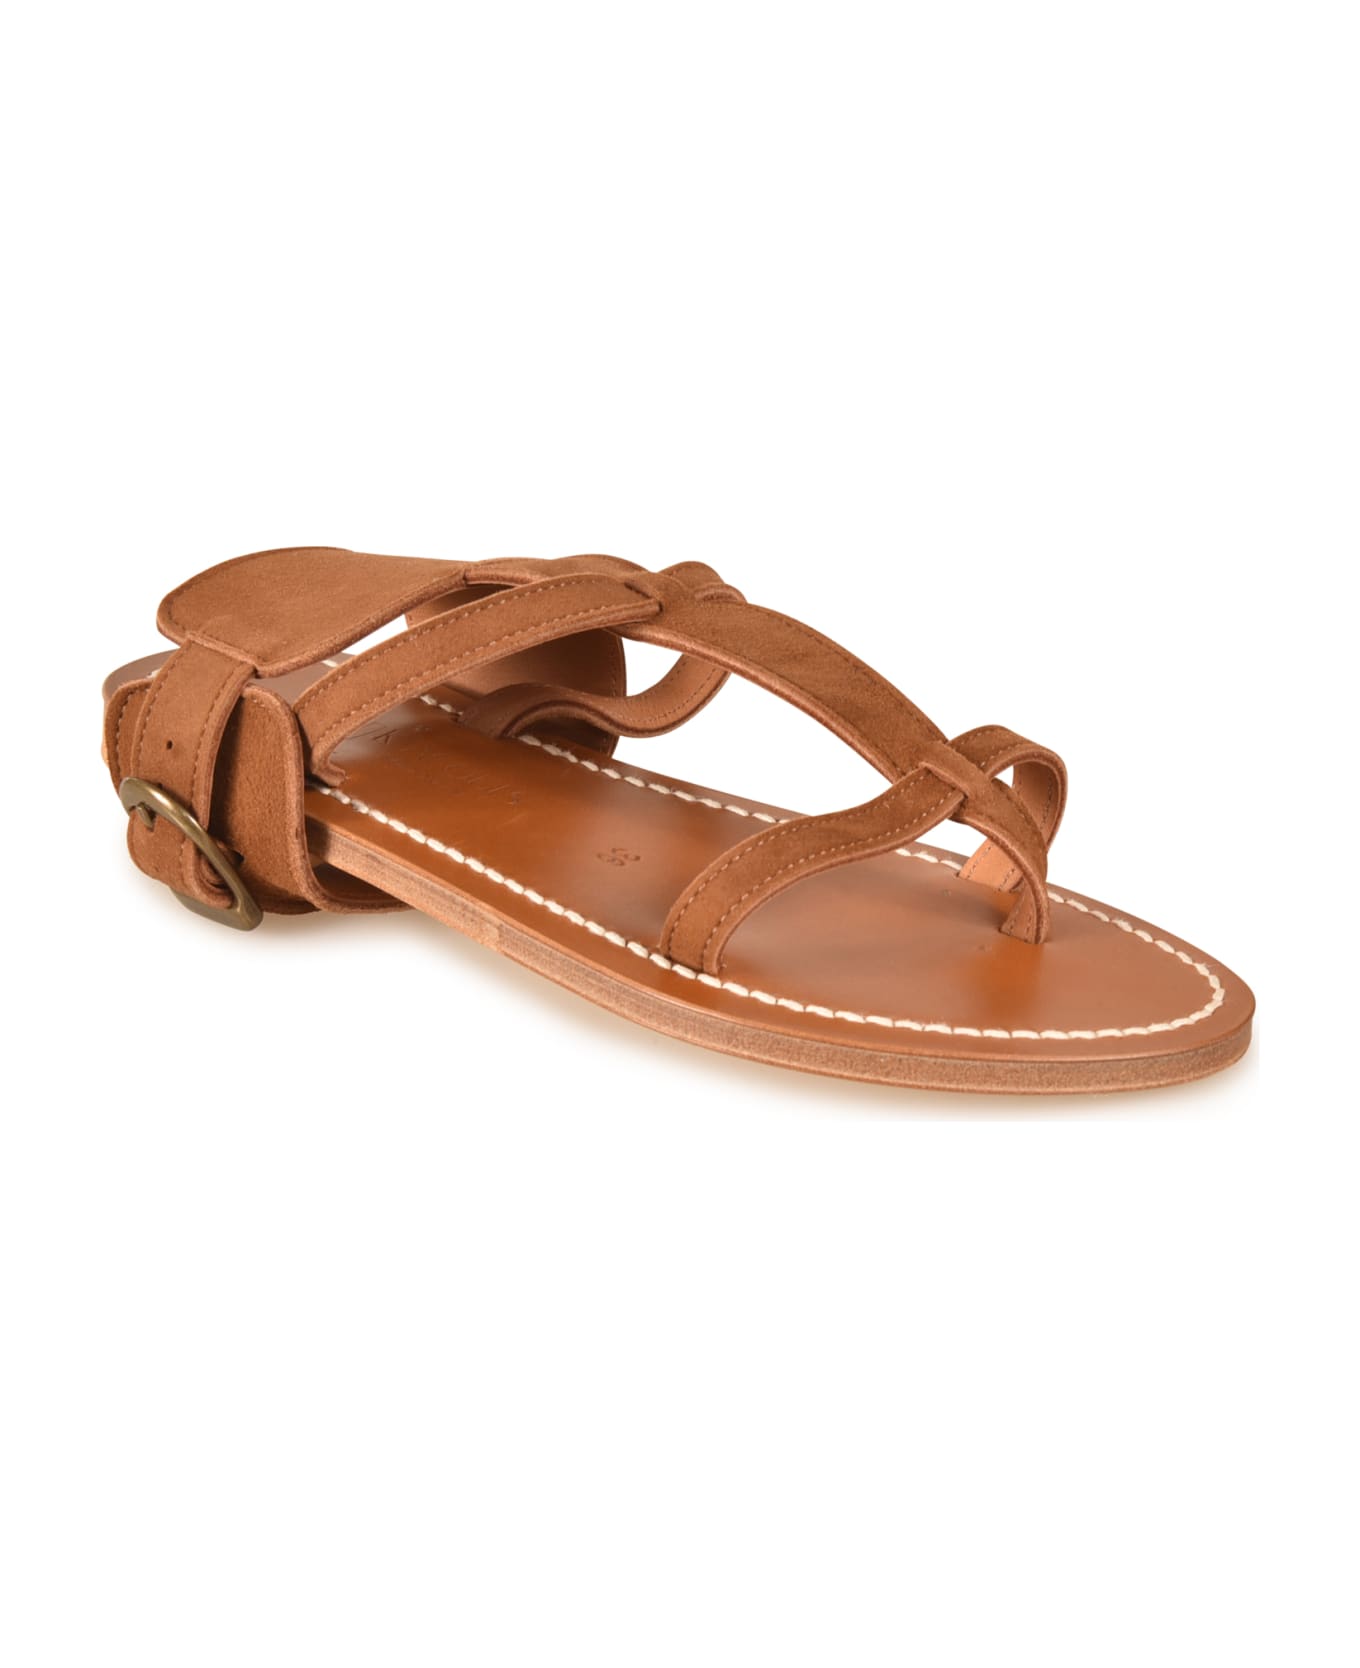 K.Jacques Ankle Buckle Strap Sandals - Leather サンダル